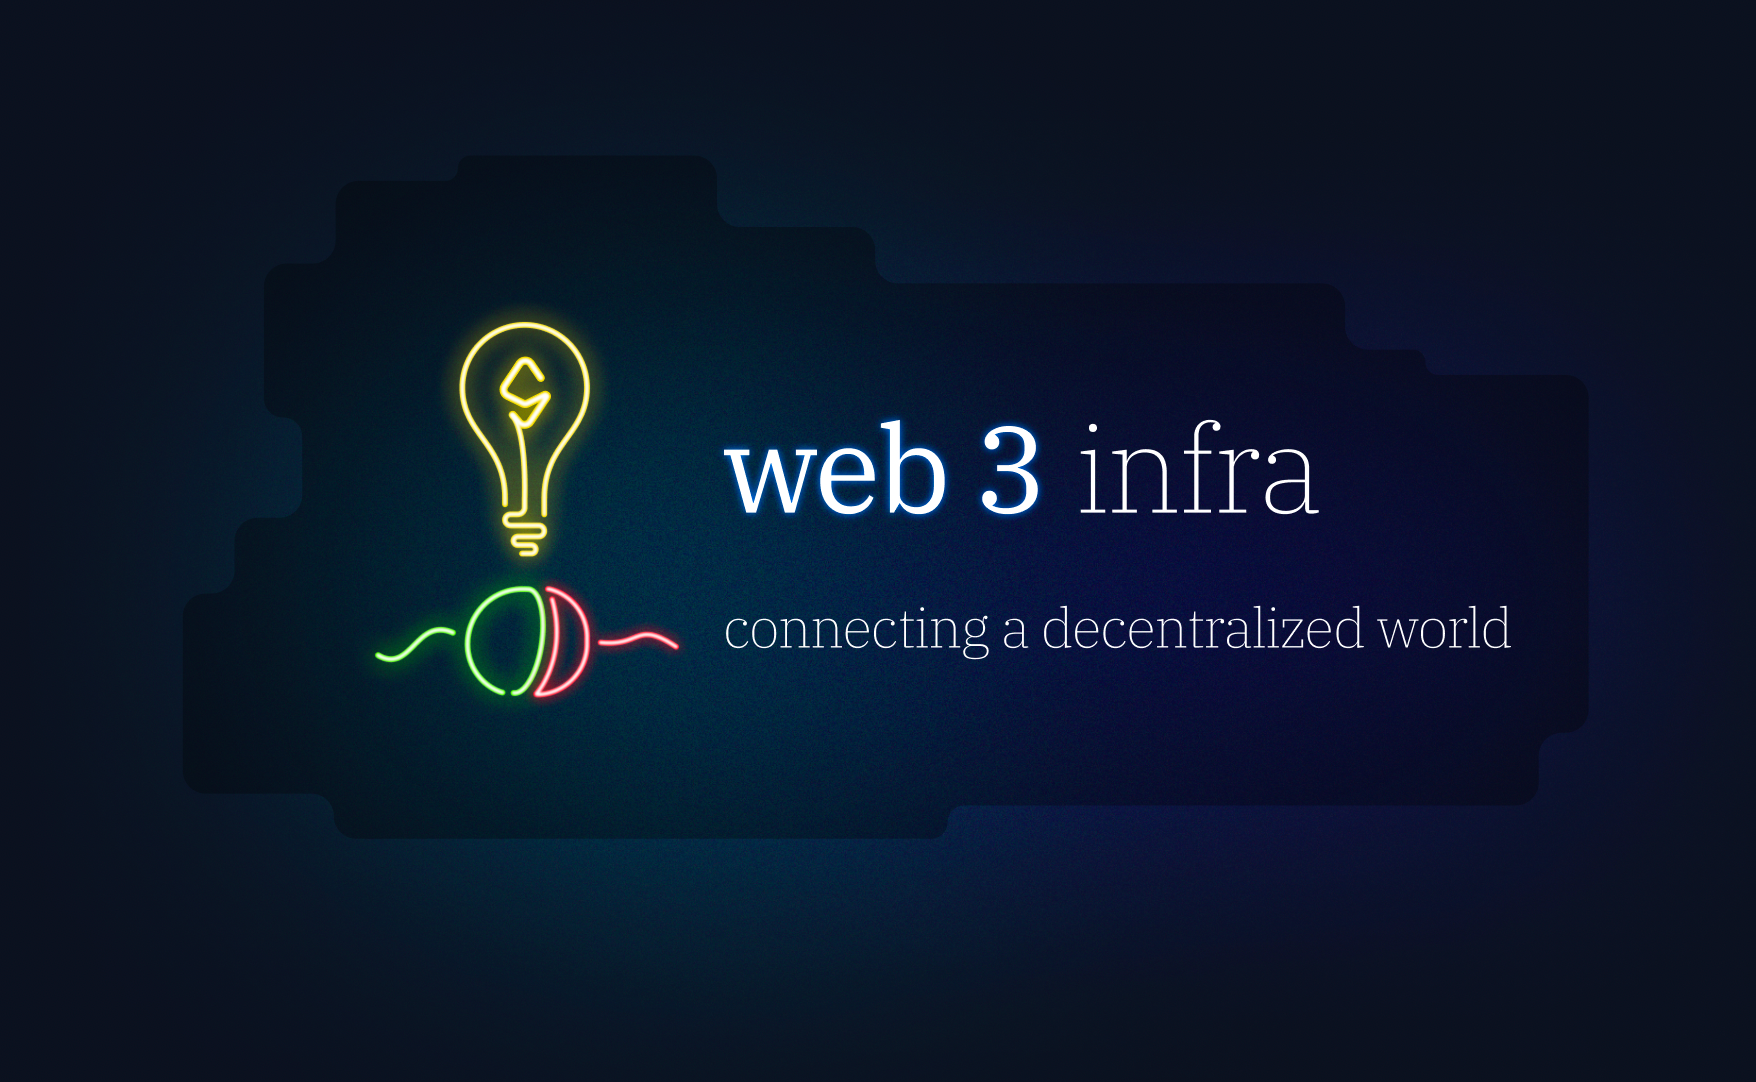 Web 3 infrastructure: The search for a connected decentralized world